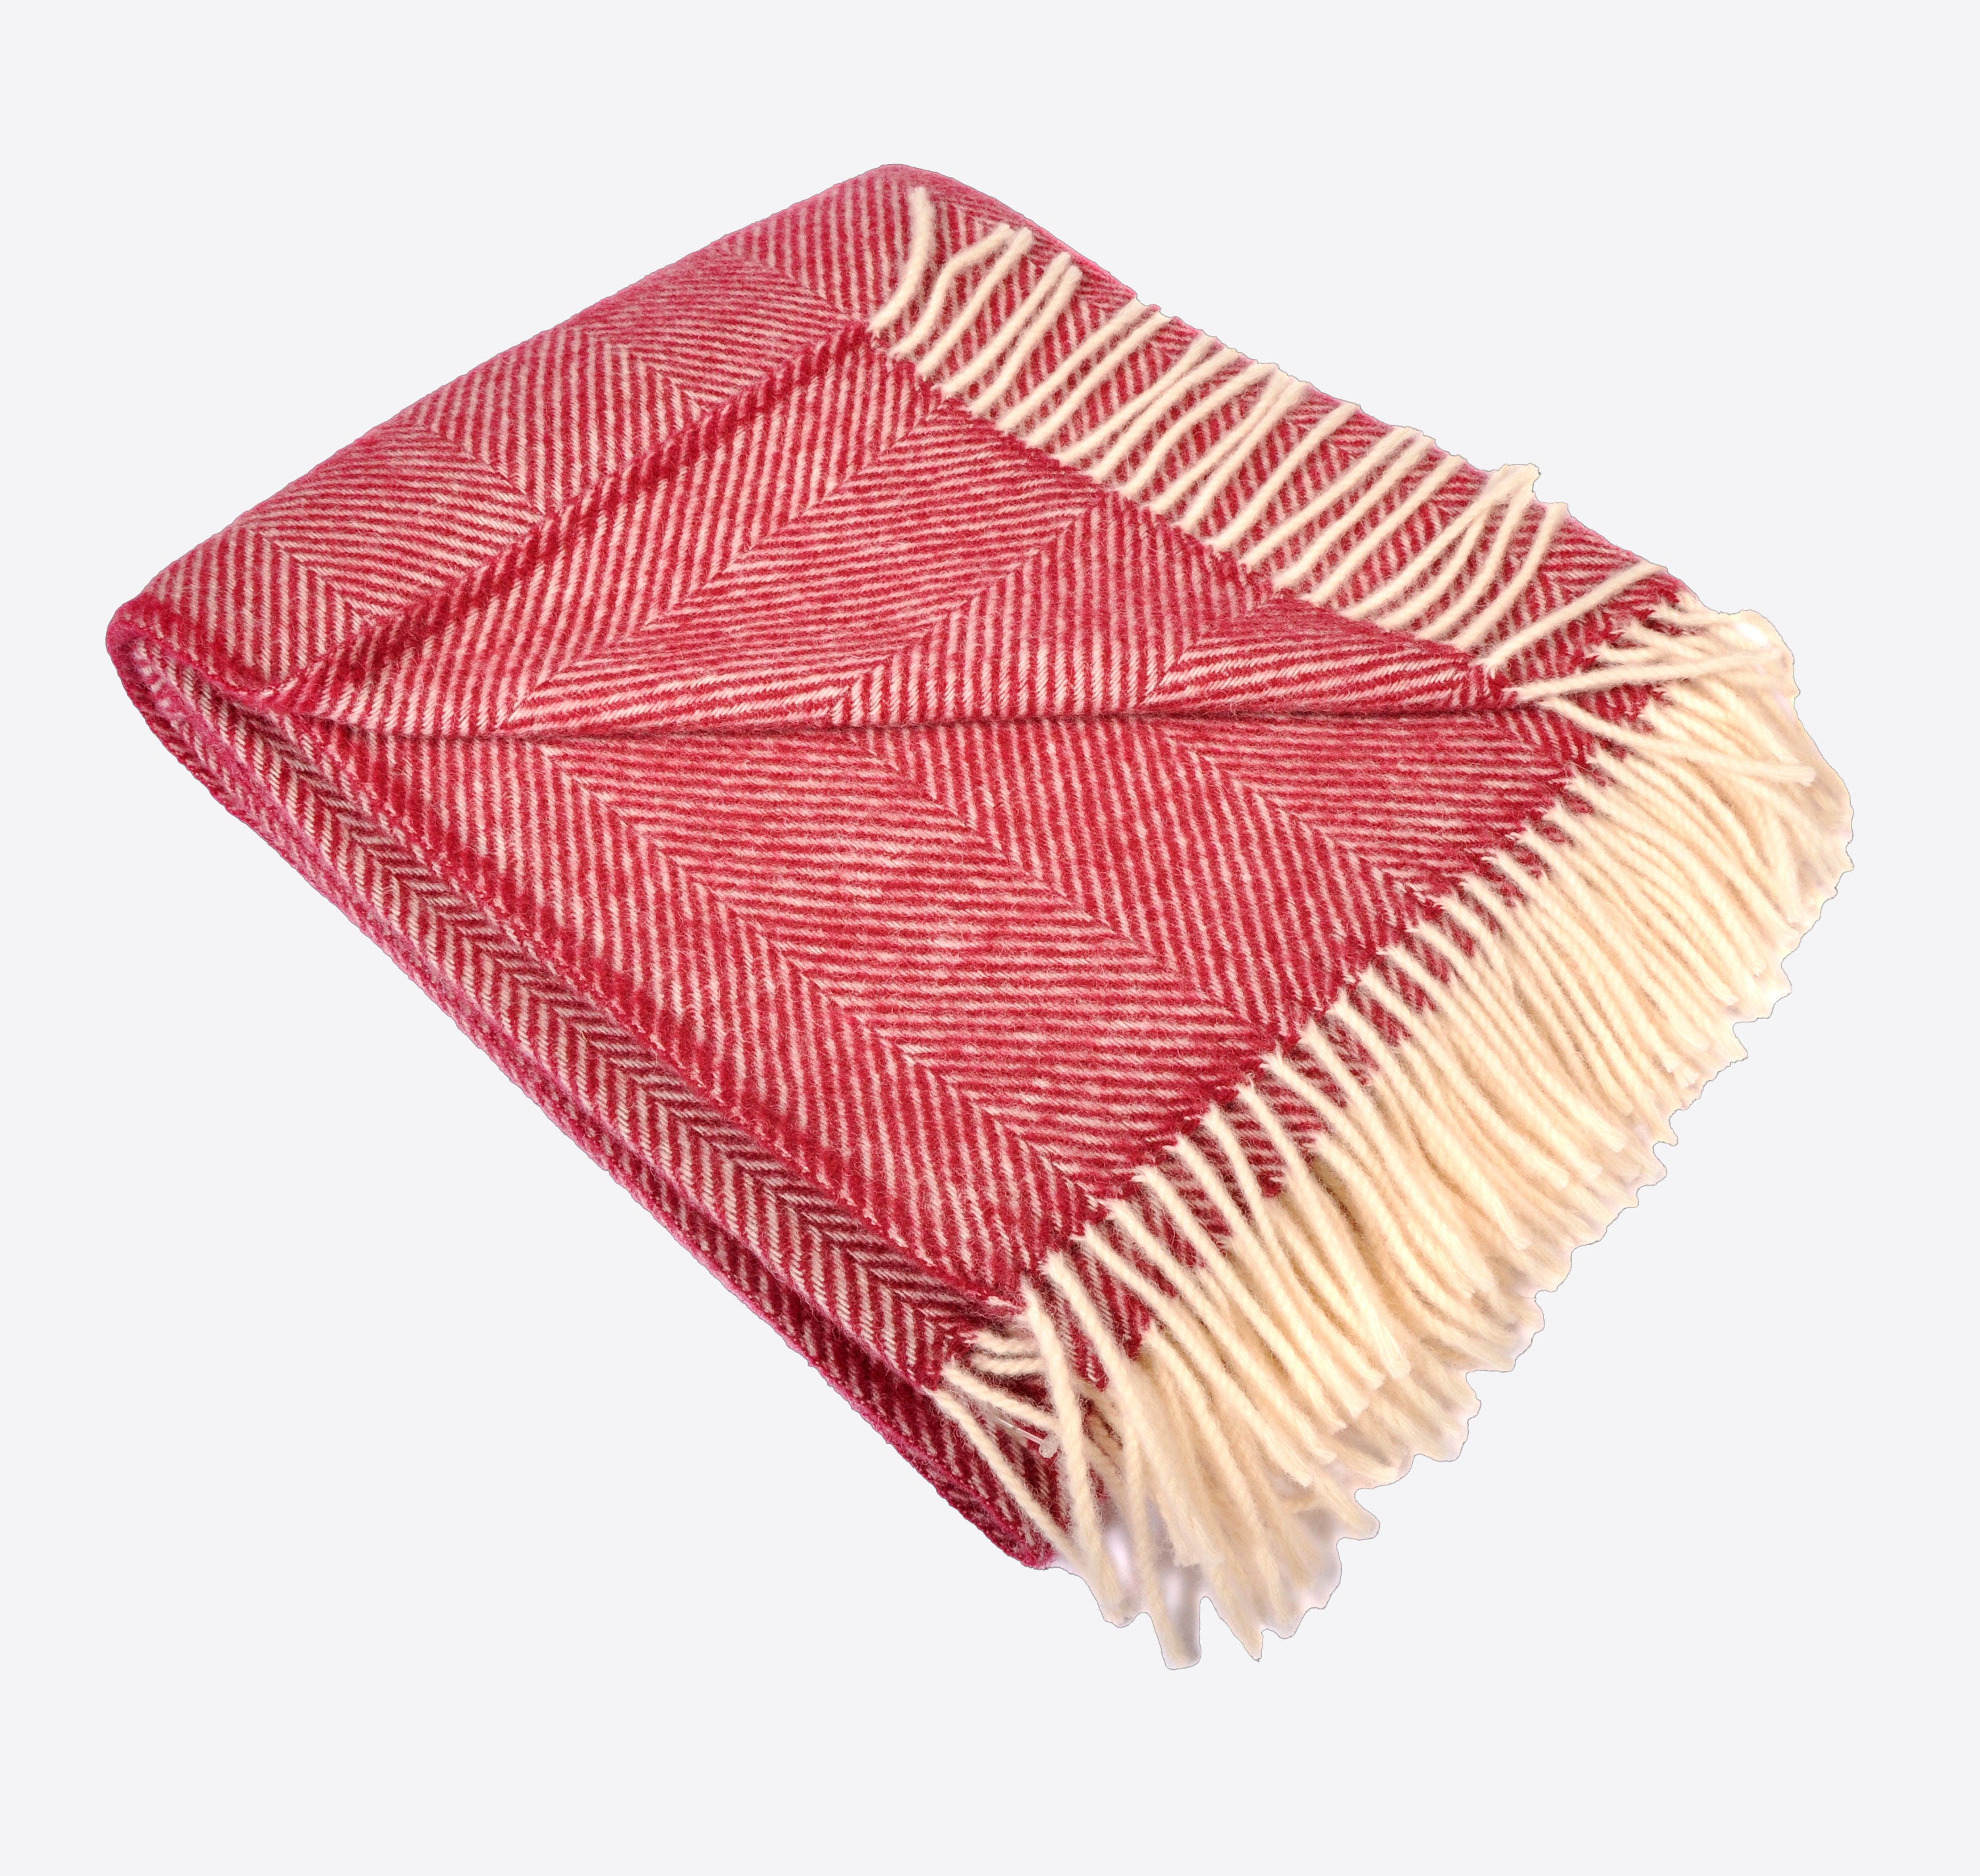 Ruby and White Throw – Joanna Wood Shop